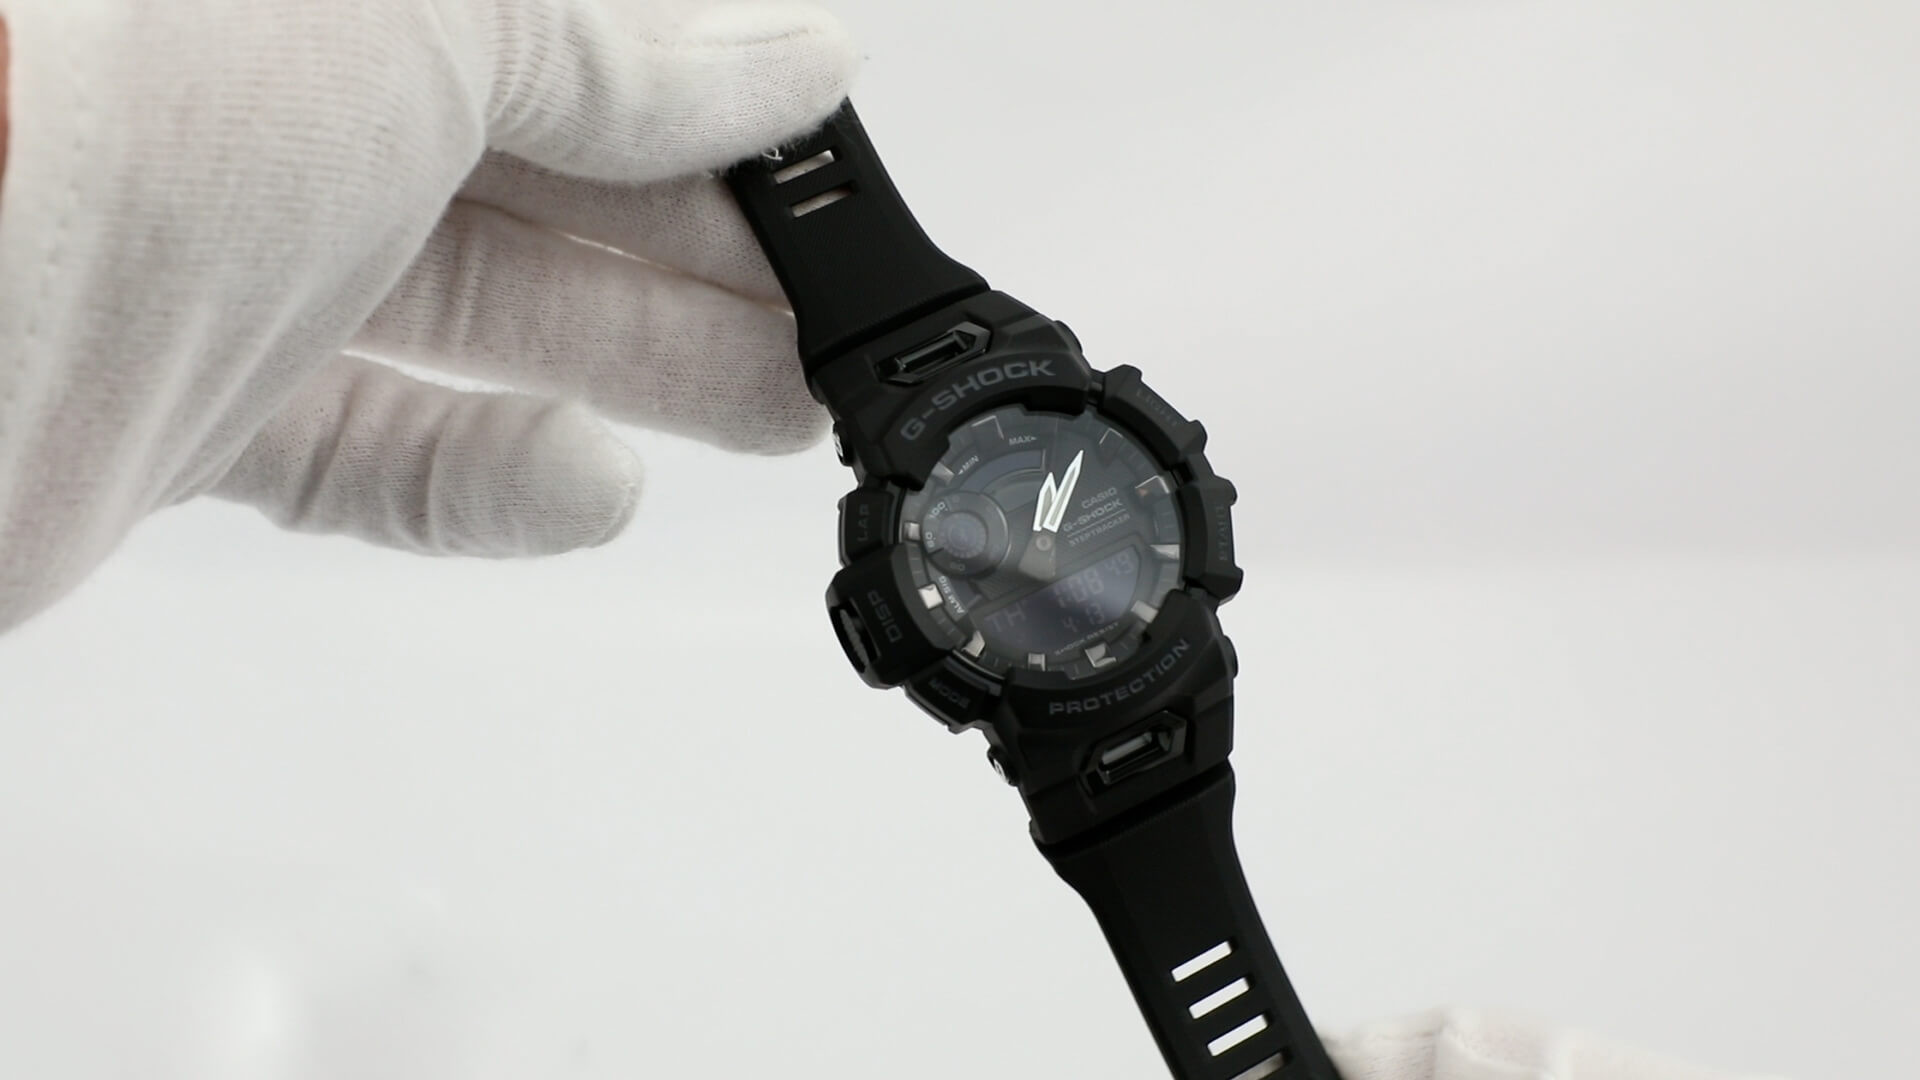 How To Change Time Zone Automatically On A G-Shock Watch